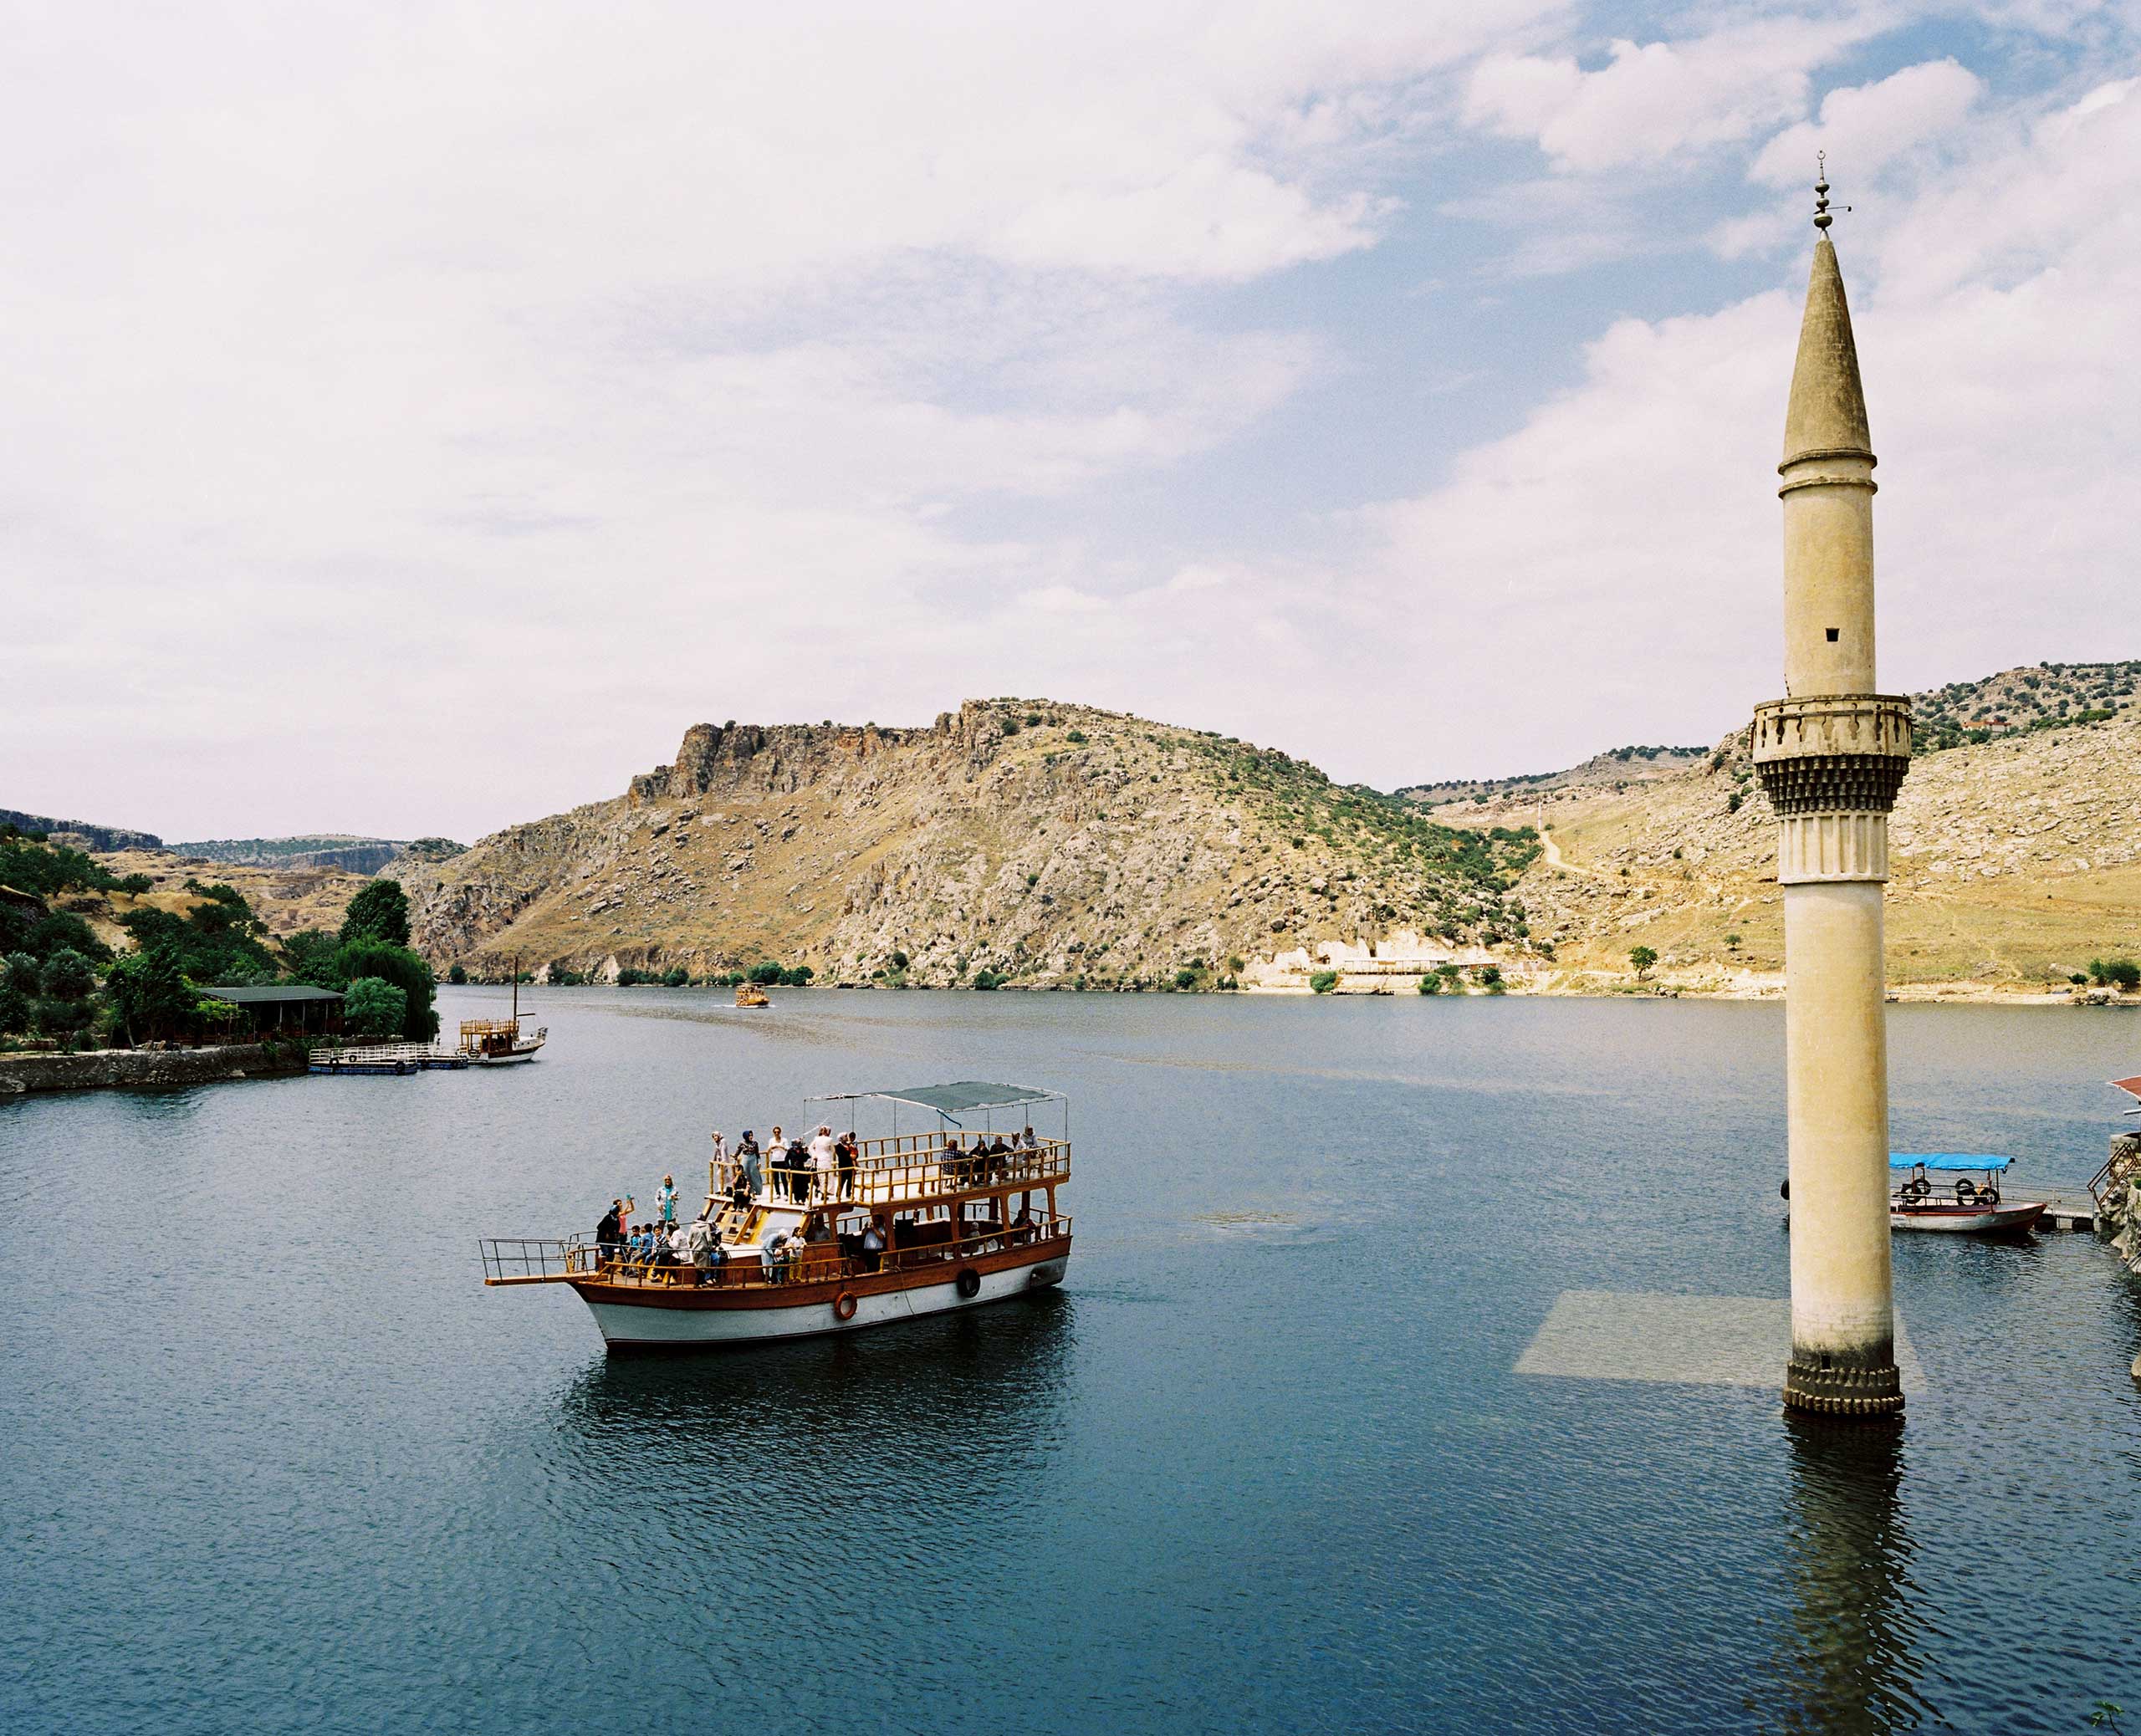 TIME LightBox: Gold RiversA tourist boat visits the former village of Savaçan, flooded by the reservoir lake of the Birecik Dam on the Euphrates River. Turkey.